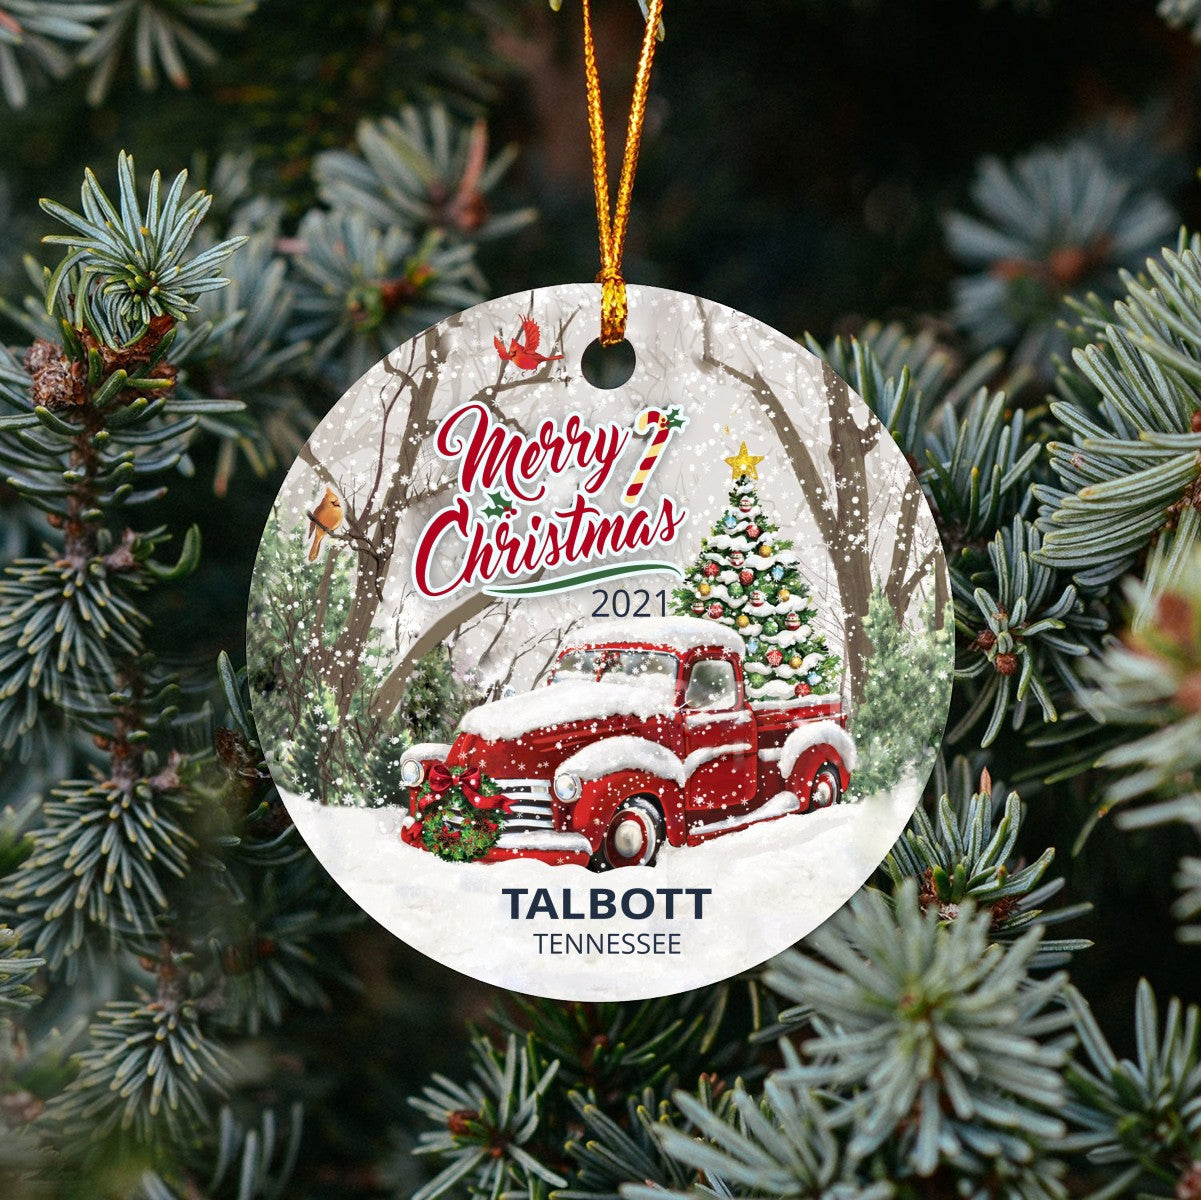 Christmas Tree Ornaments Talbott - Ornament Customize With Name City And State Talbott Tennessee TN - Red Truck Xmas Ornaments 3'' Plastic Gift For Family, Friend And Housewarming